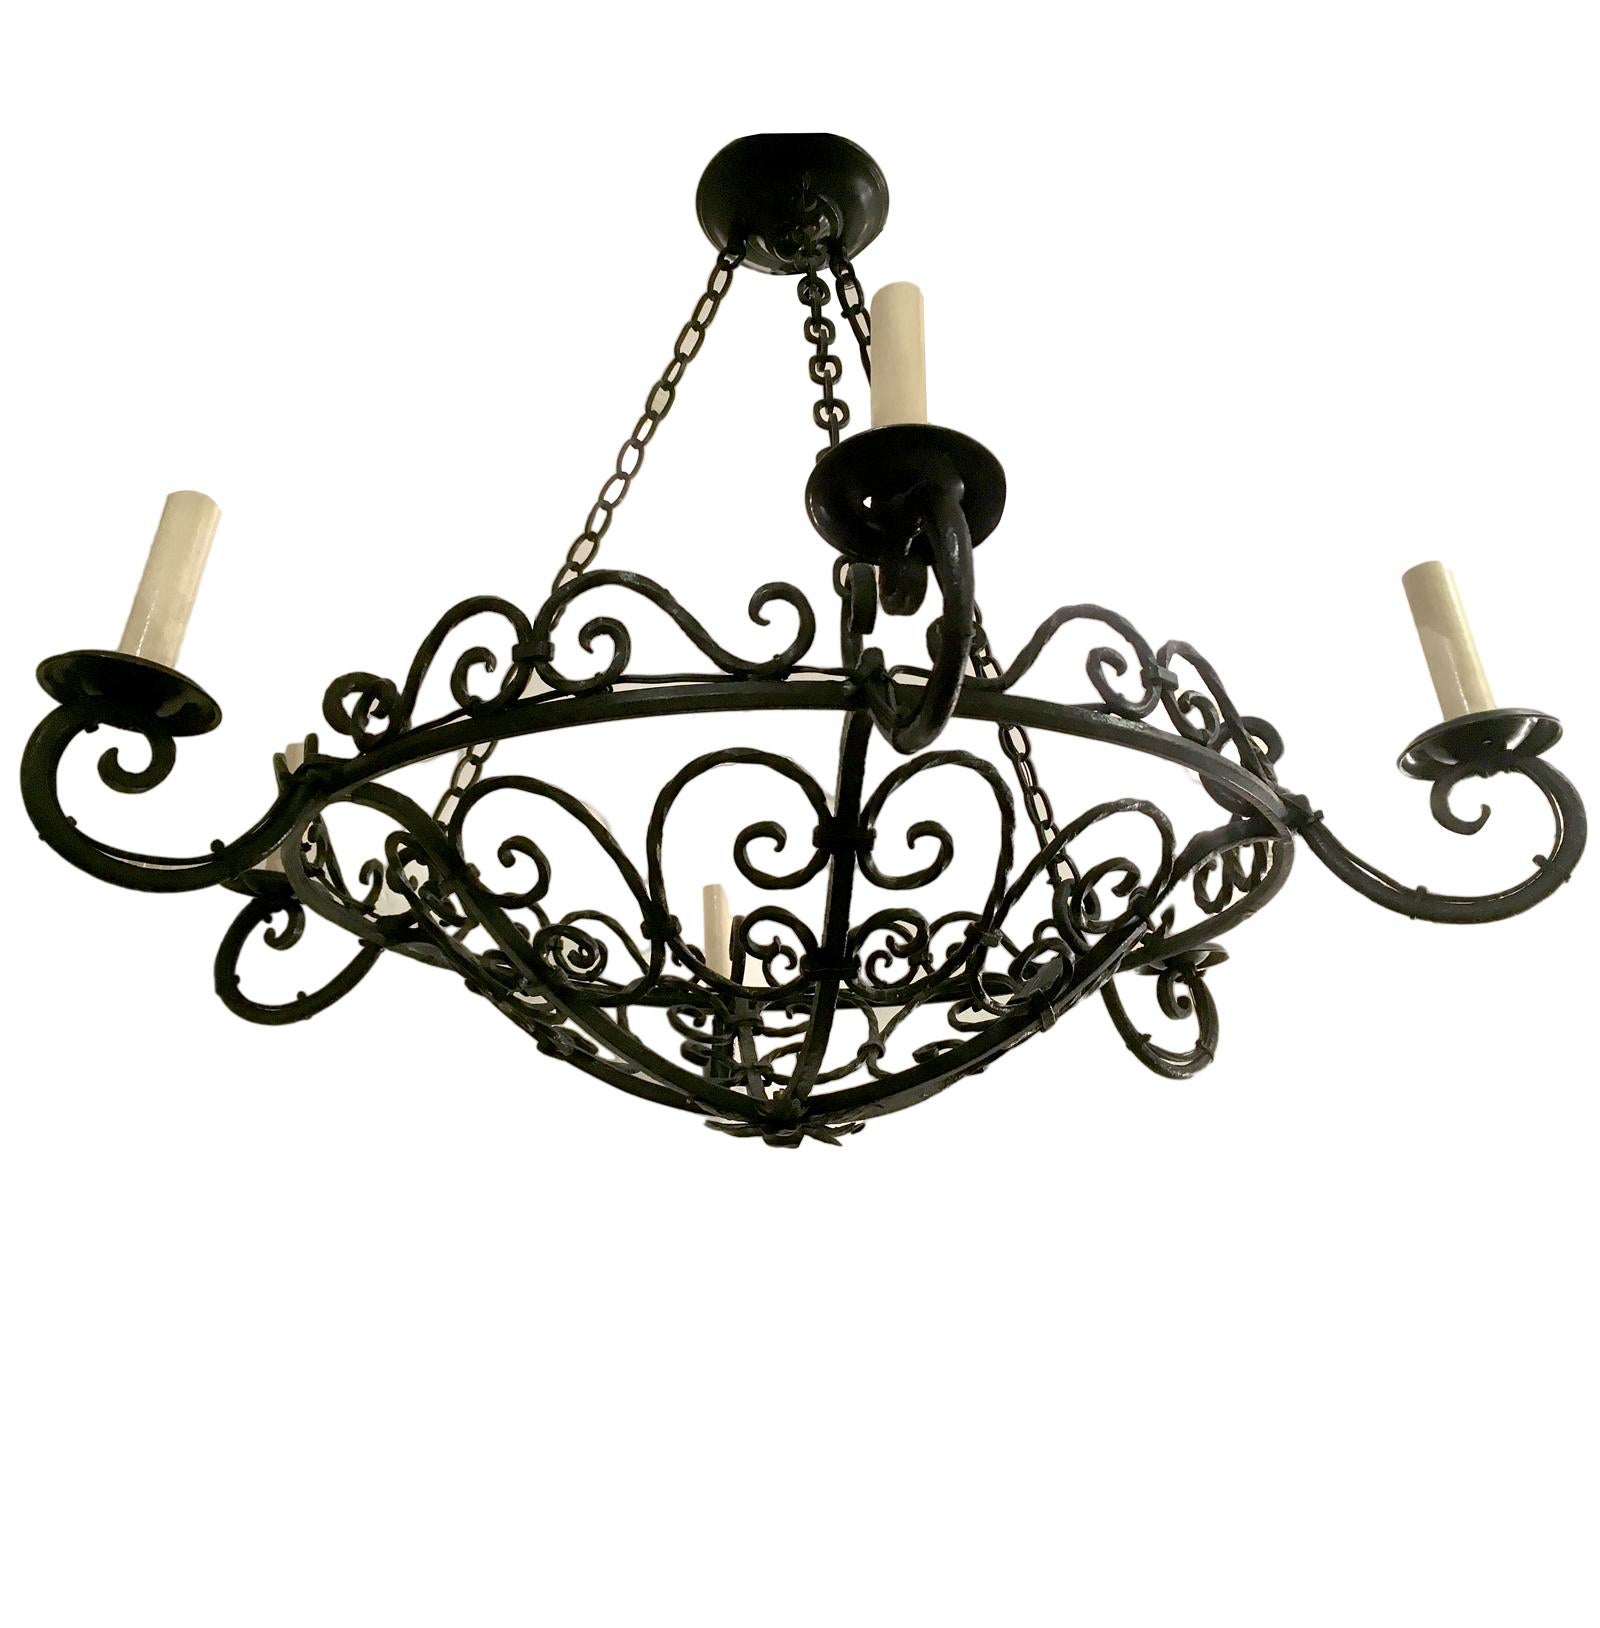 A circa 1930s French wrought iron chandelier with six lights.
Measurements:
33